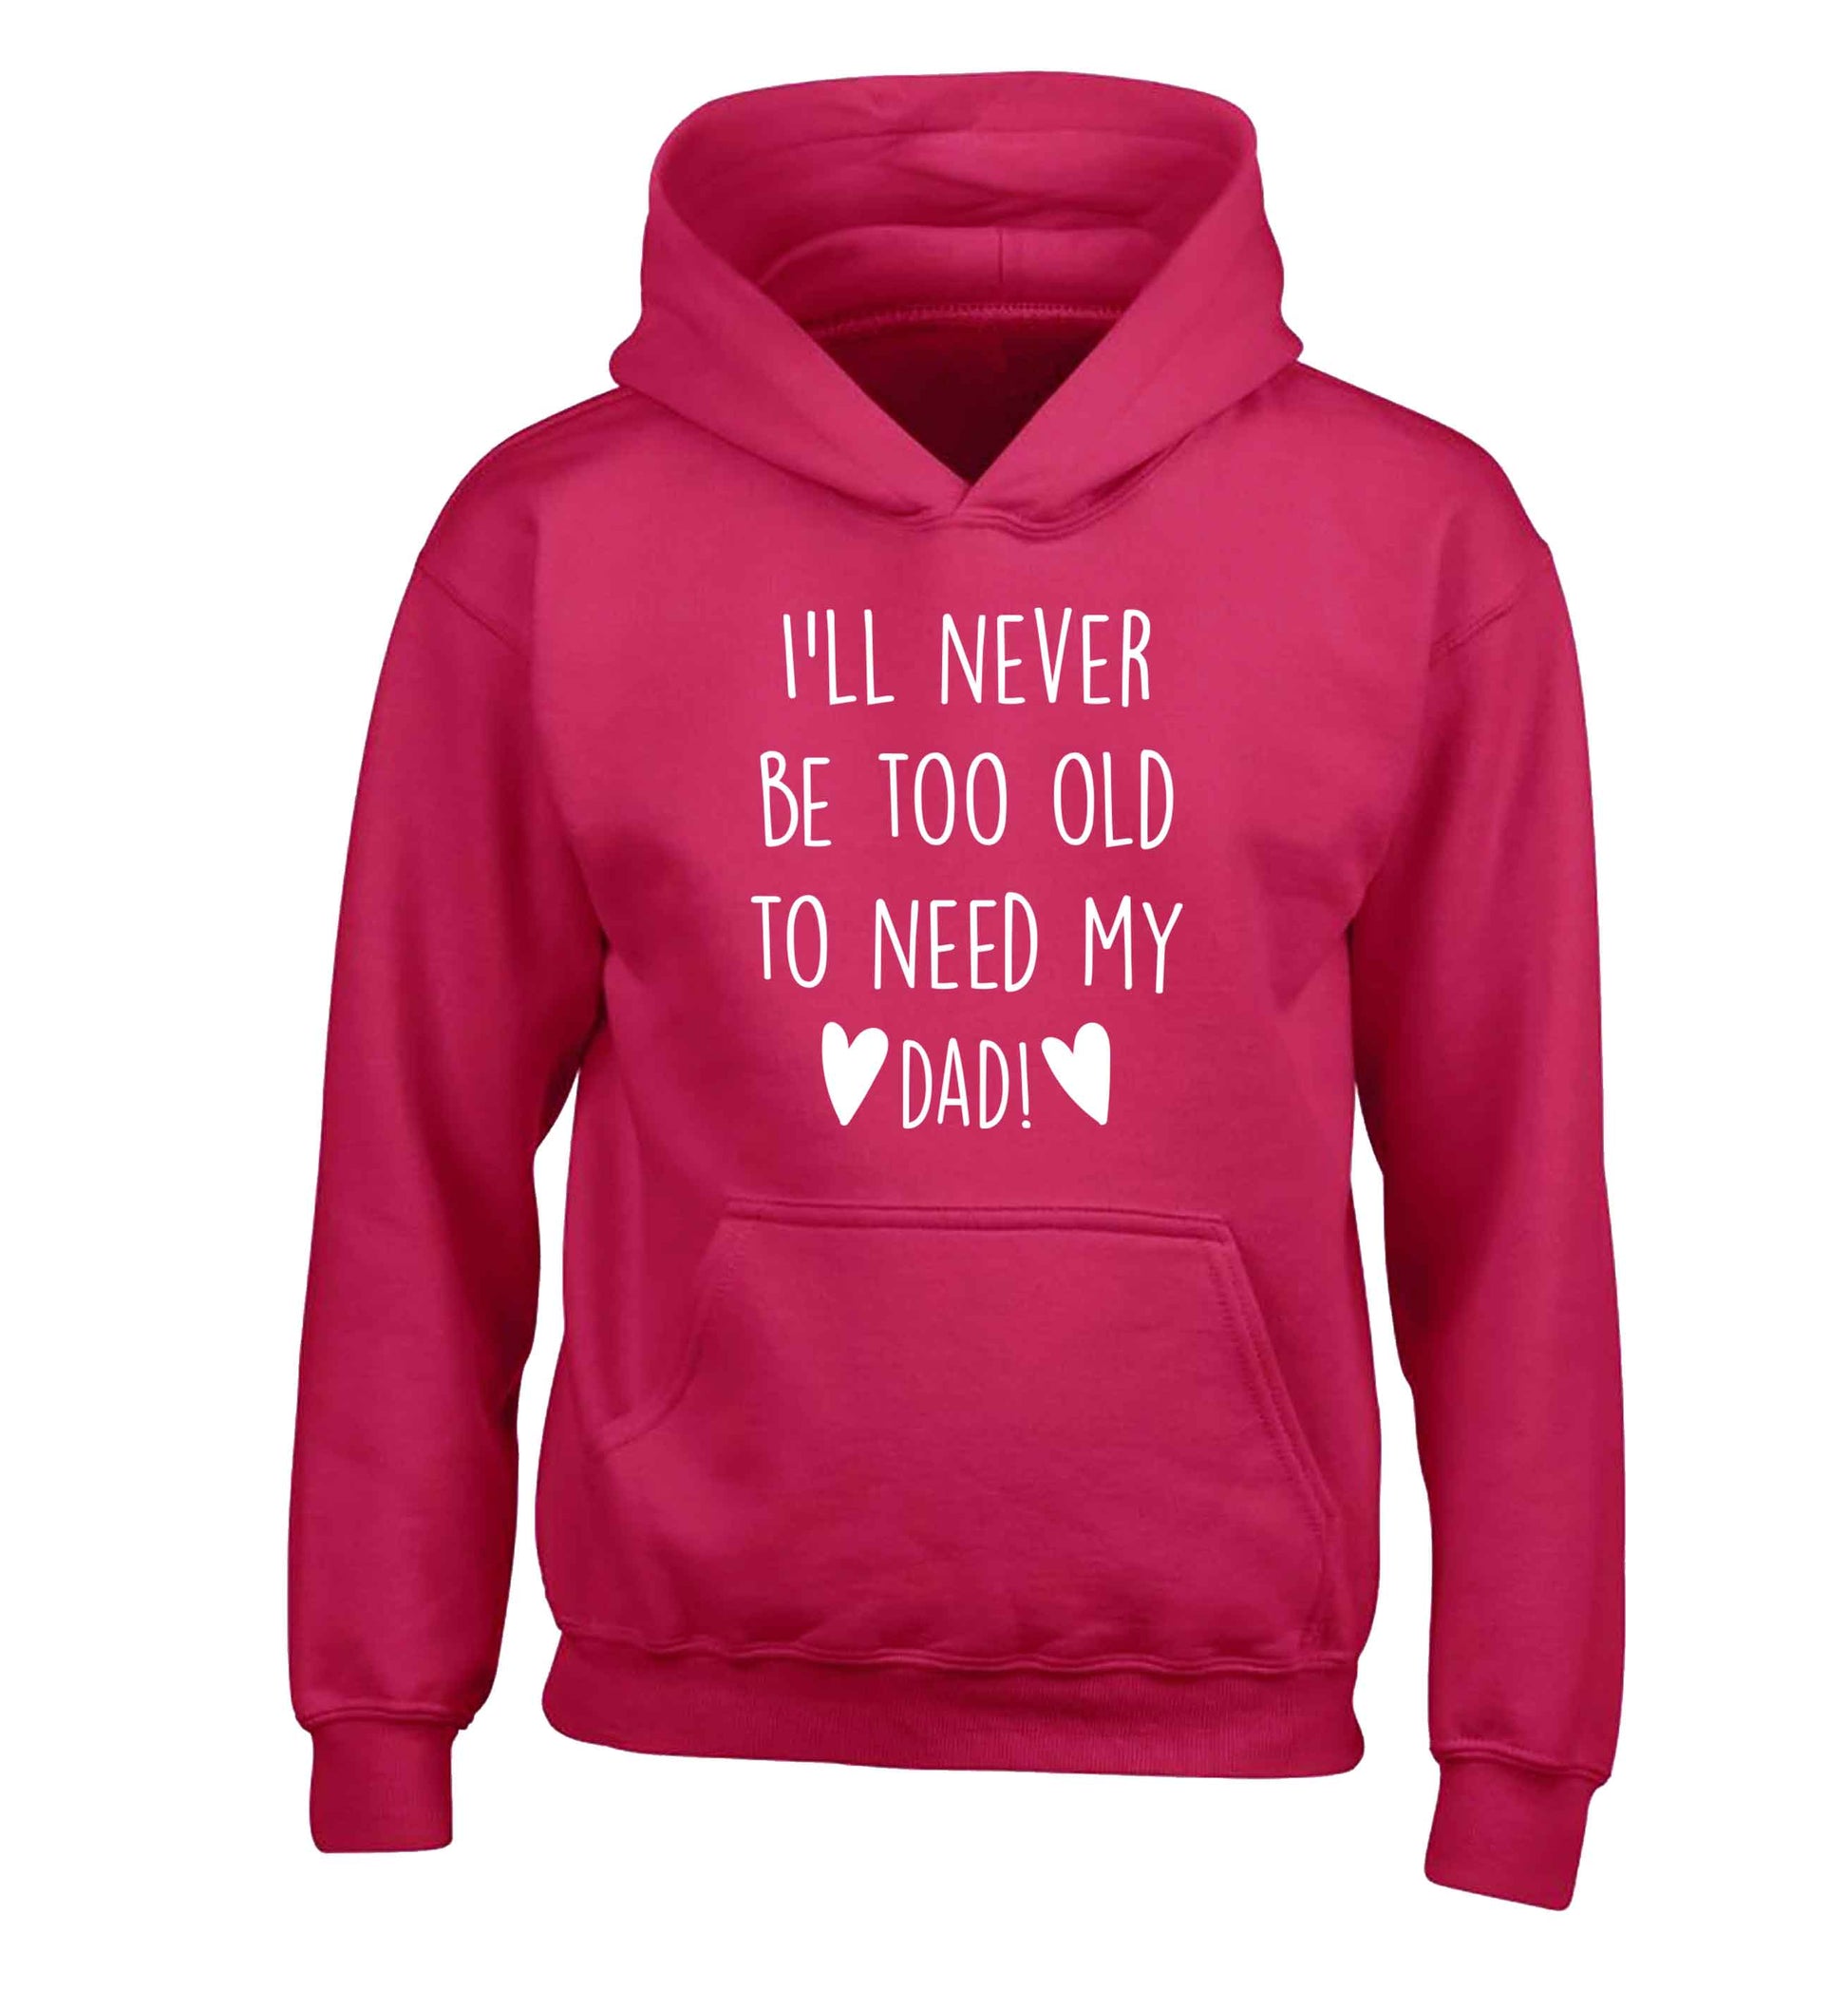 I'll never be too old to need my dad children's pink hoodie 12-13 Years